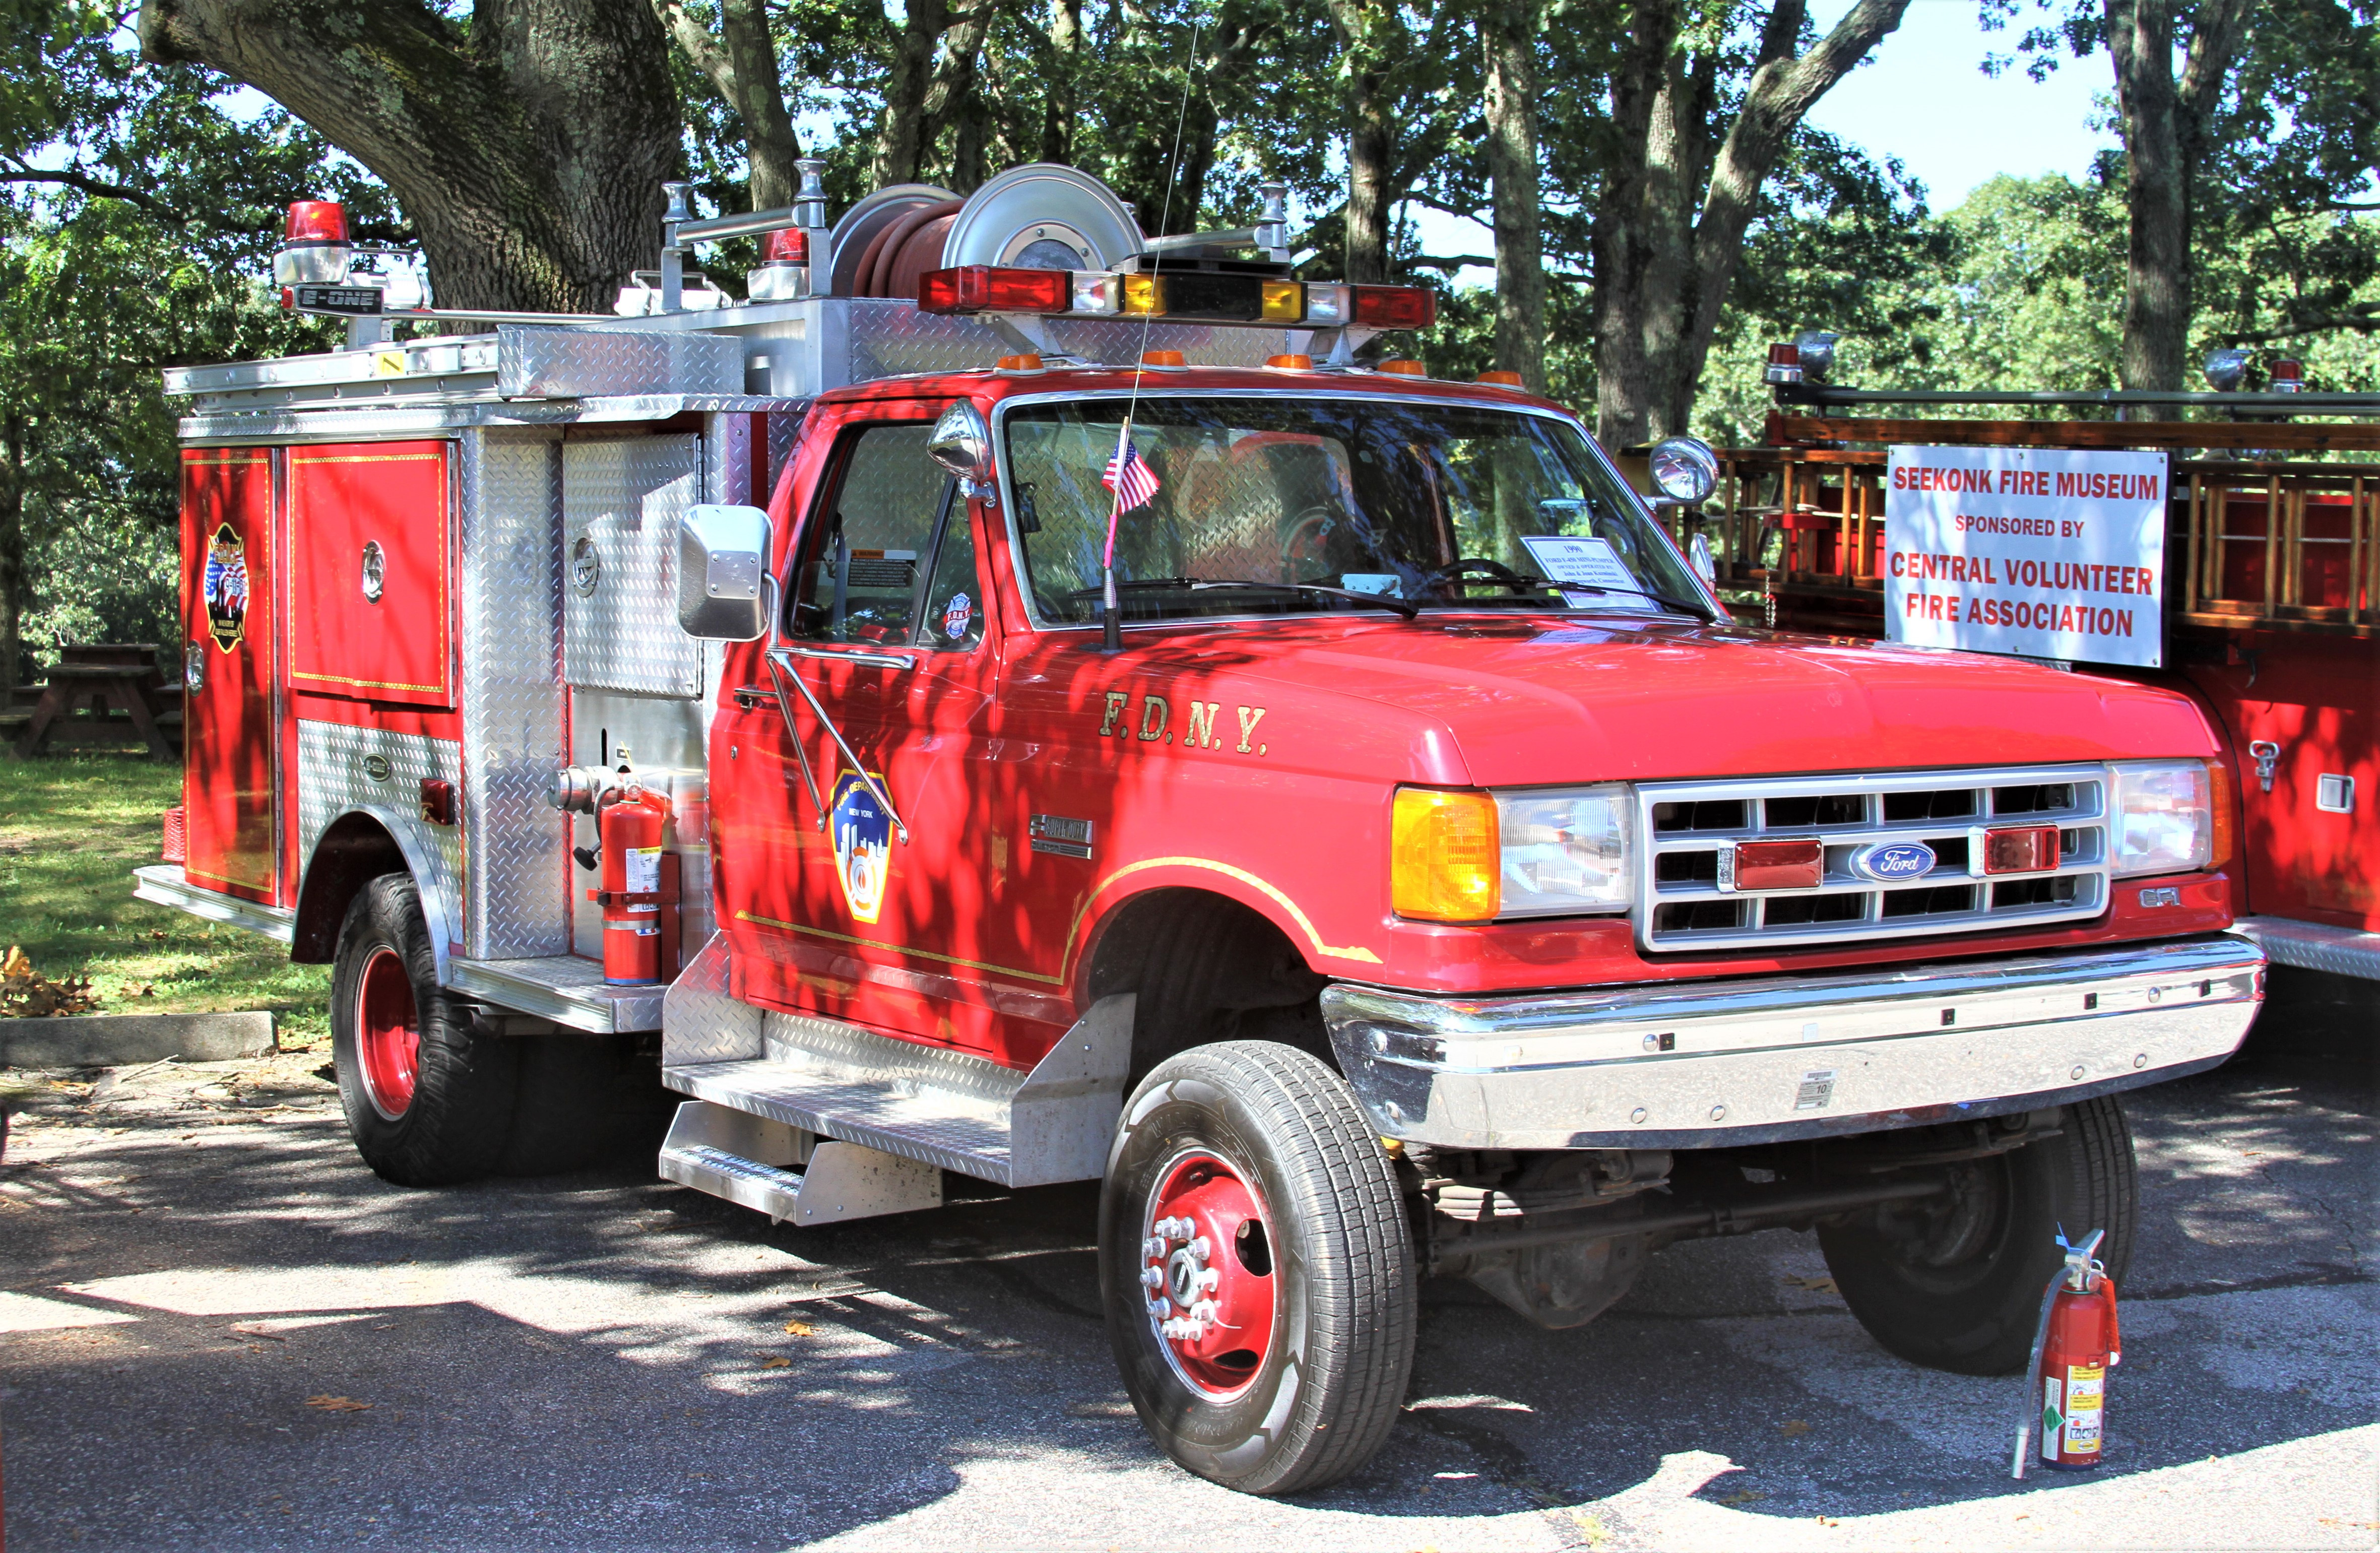 A photo  of Antique Fire Apparatus in Rhode Island
            FDNY 4x4 Brush Truck, a 1990-1998 Ford F-Super Duty/E-One             taken by Richard Schmitter